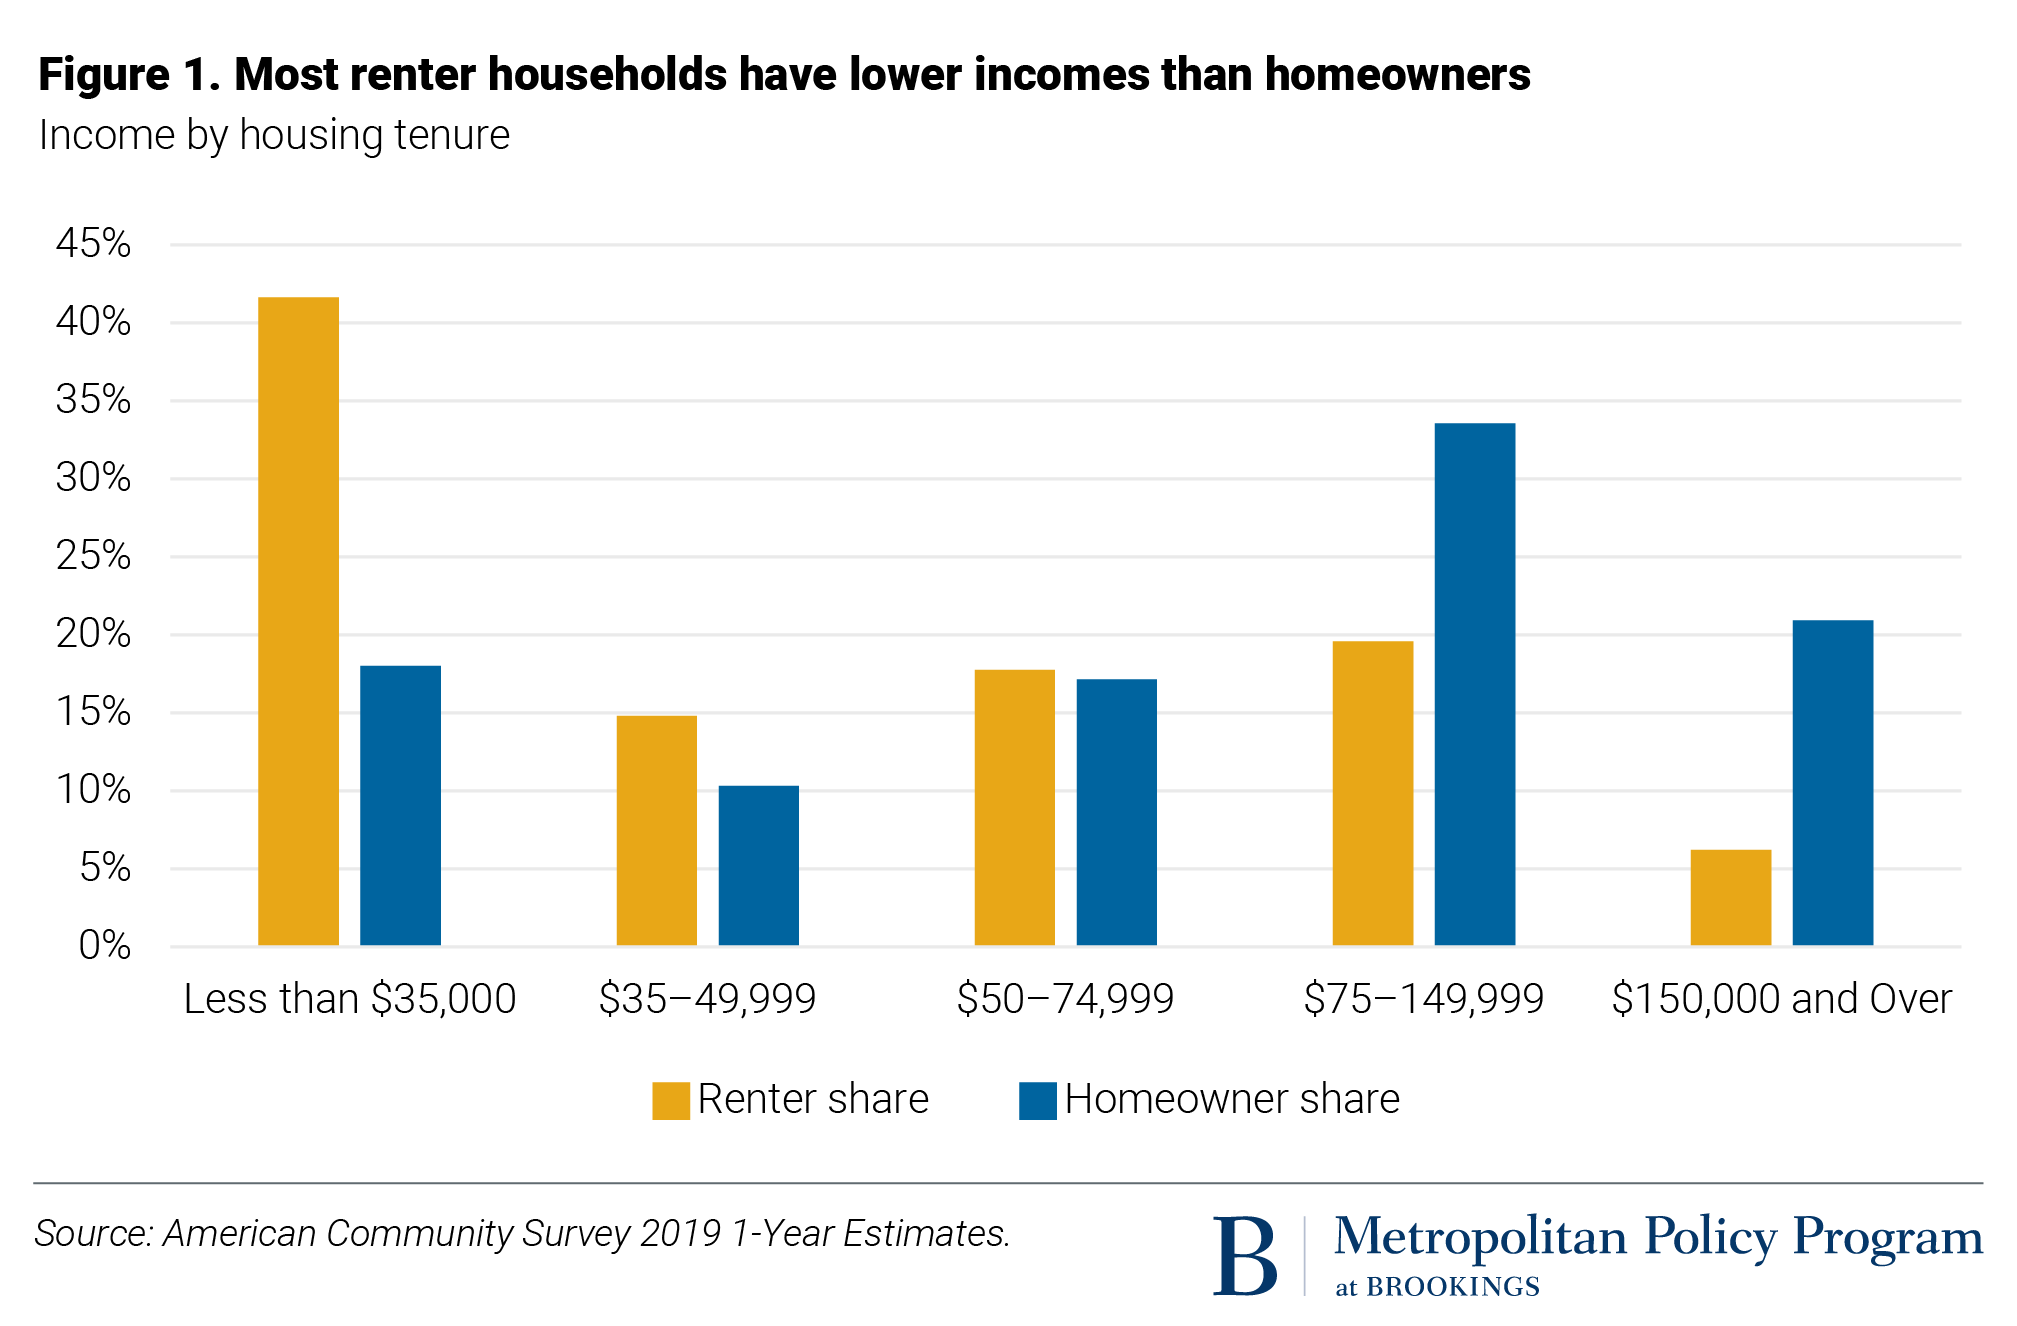 U.S. rental housing markets are diverse, decentralized, and financially